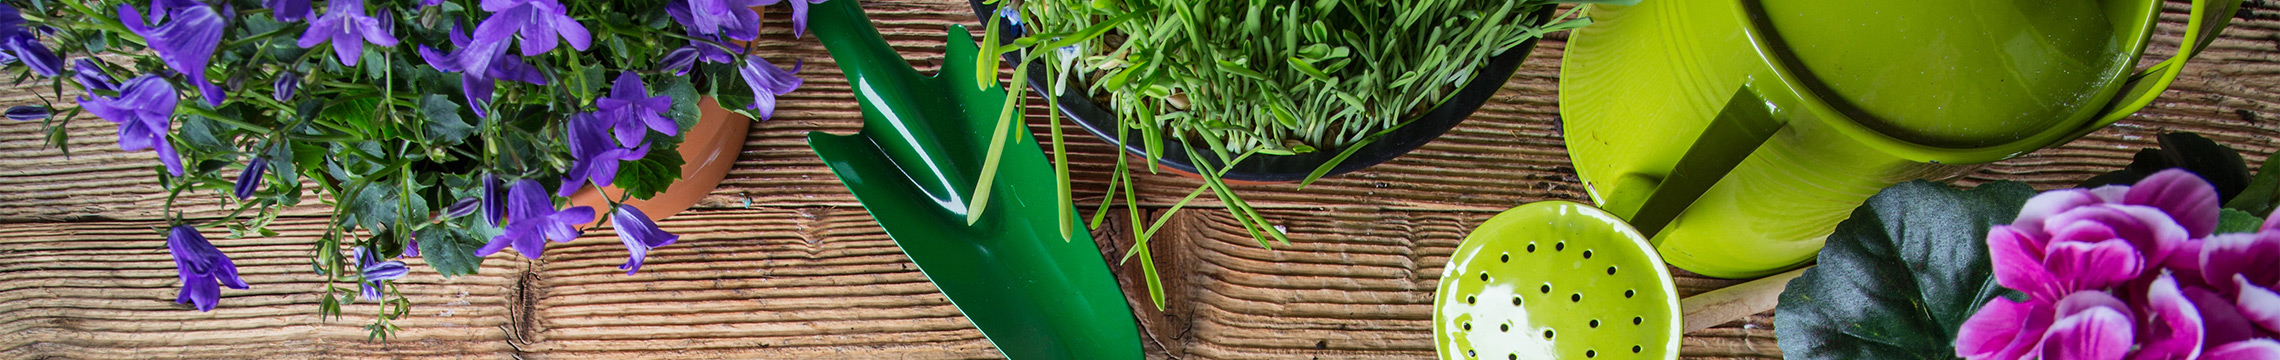 Green metal watering can and trowel with loose soil and potted grass